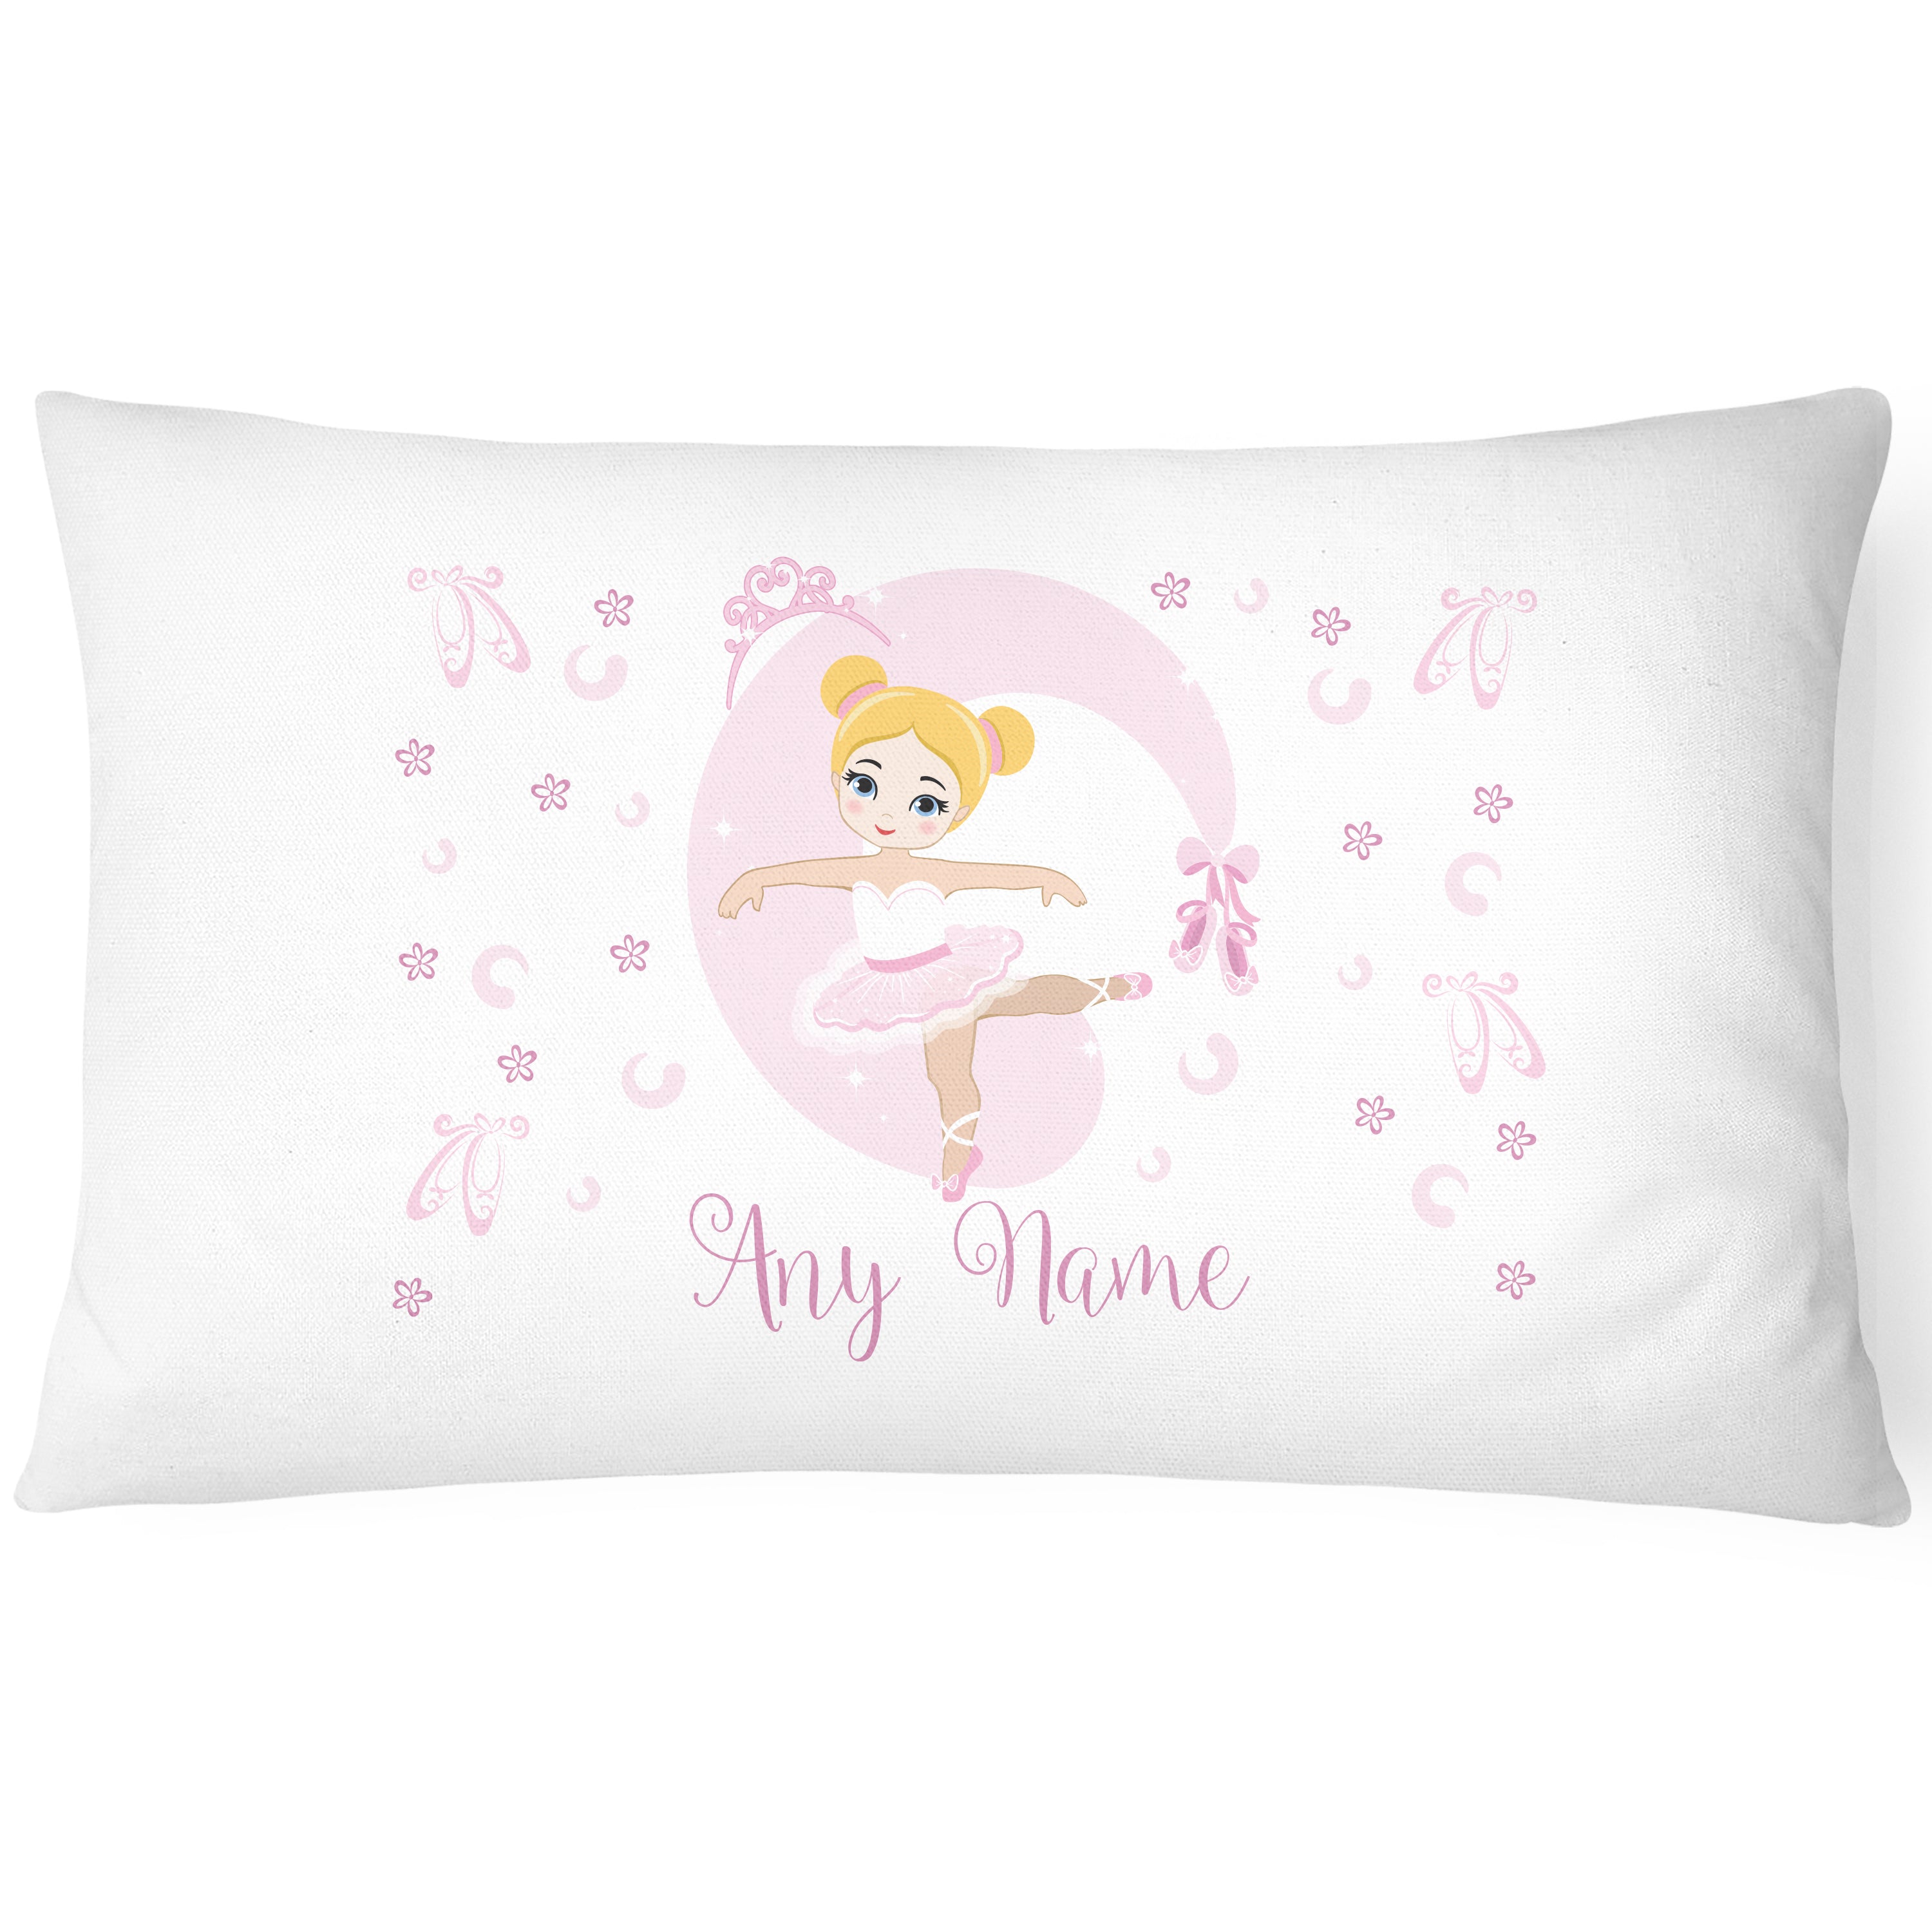 Ballerina Children's Pillowcase - Personalise with Any Name - Sweet